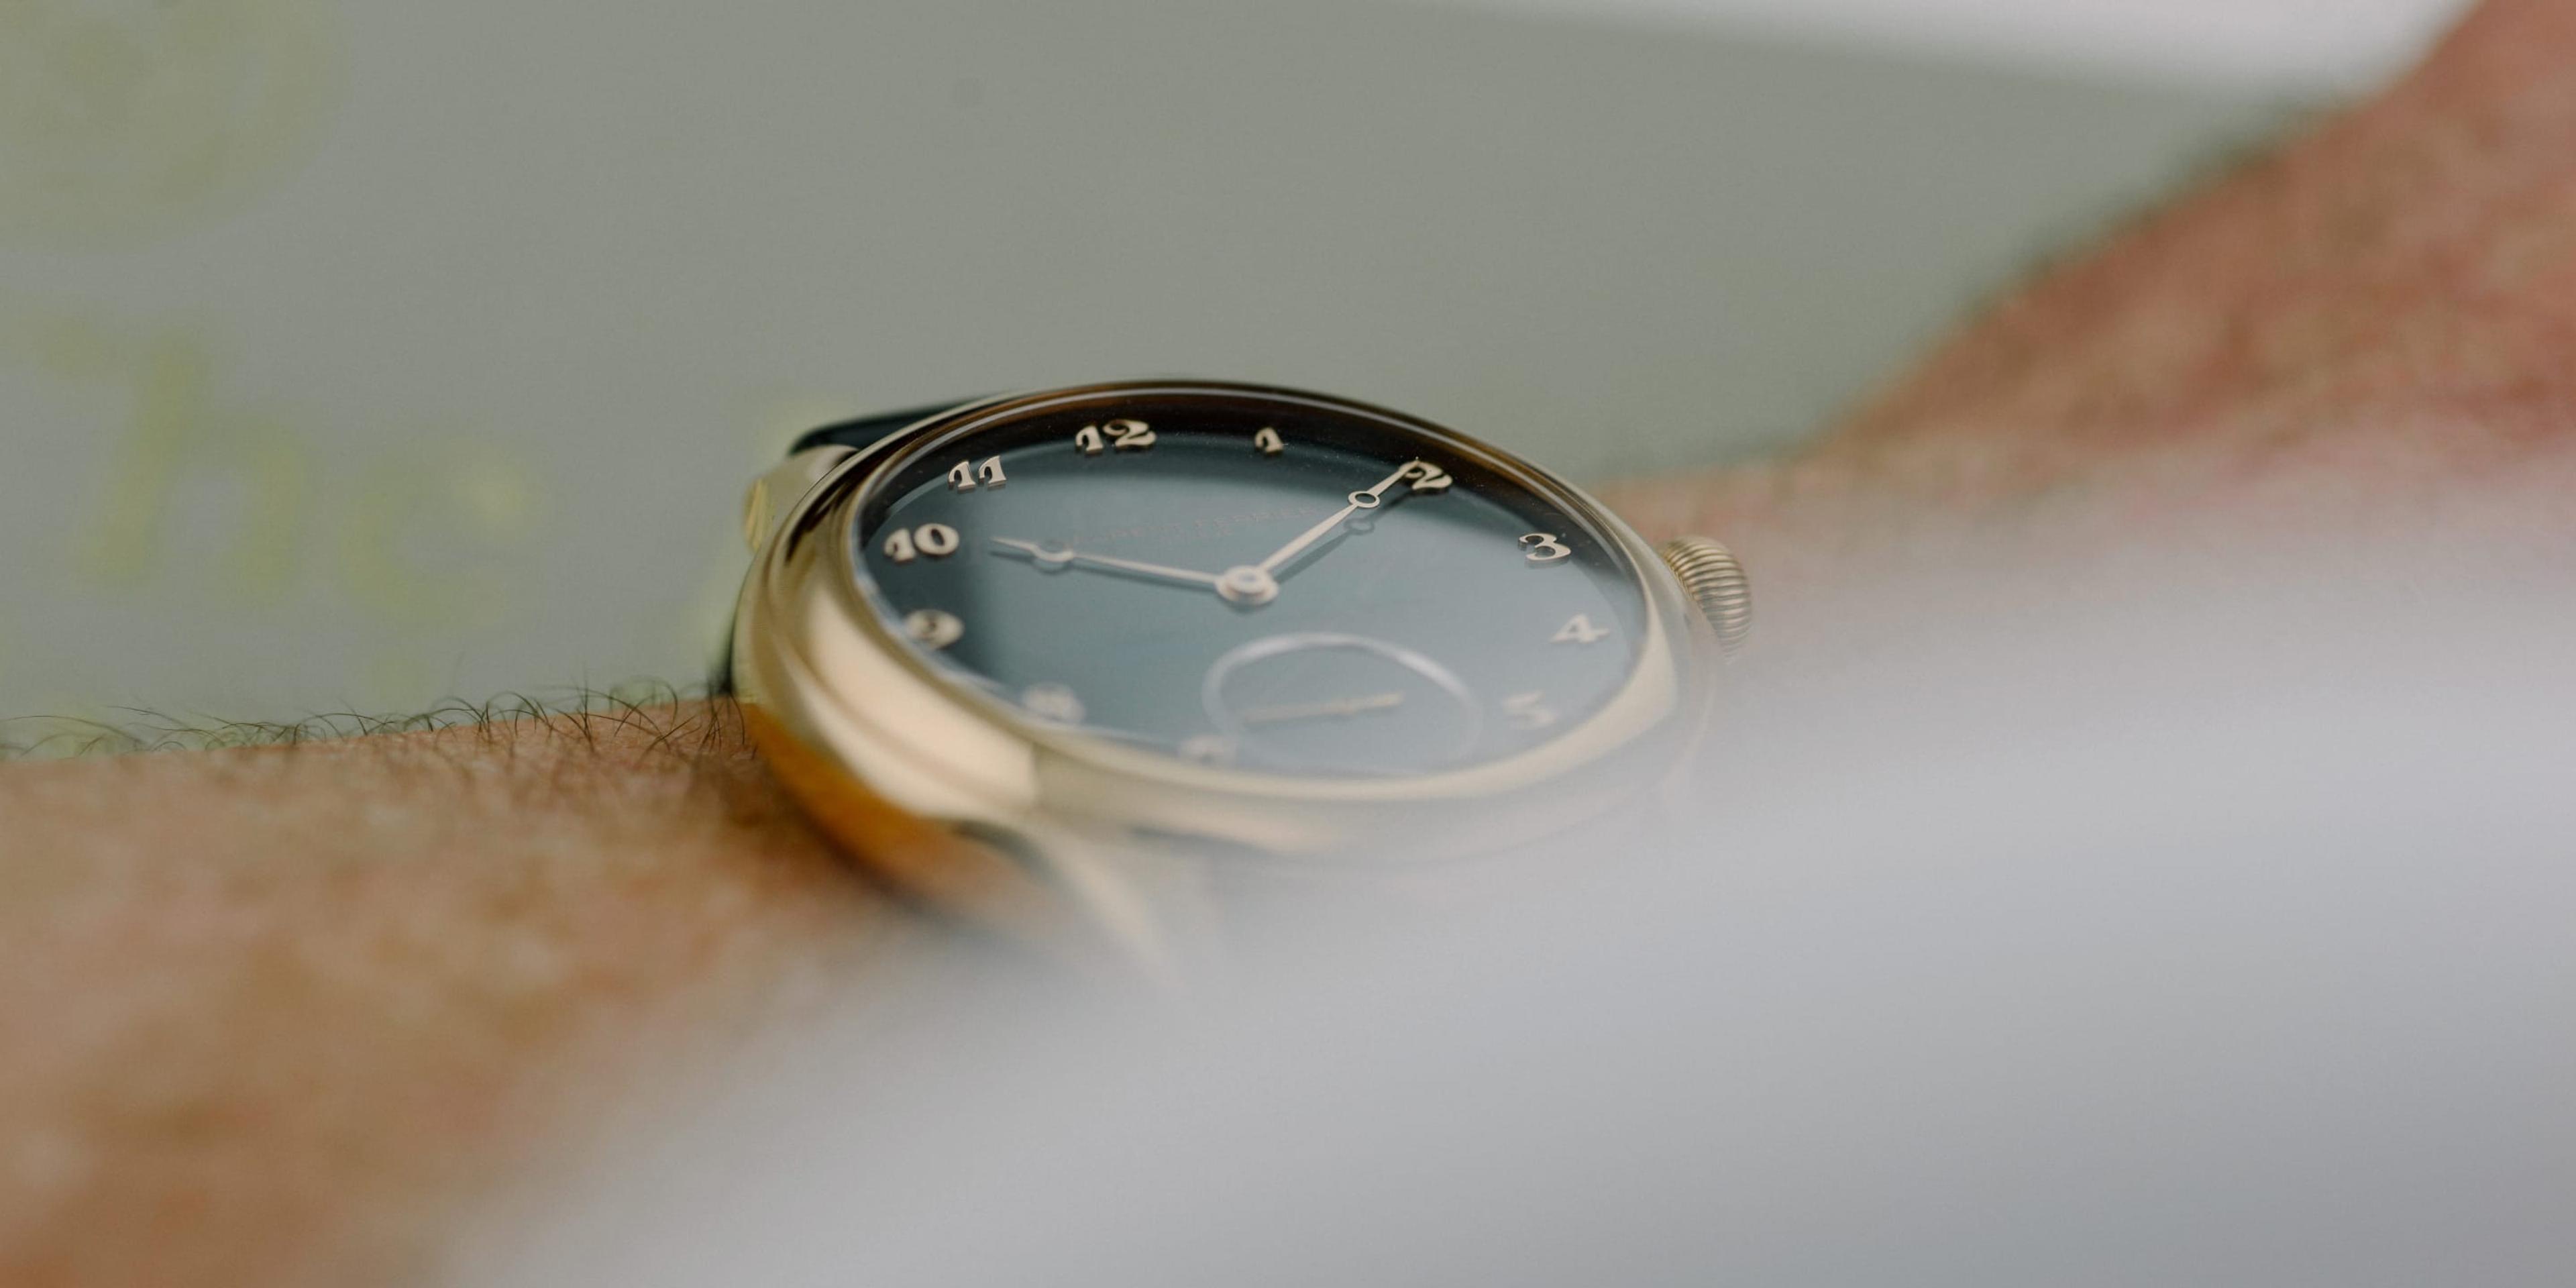 A watch with a gold face